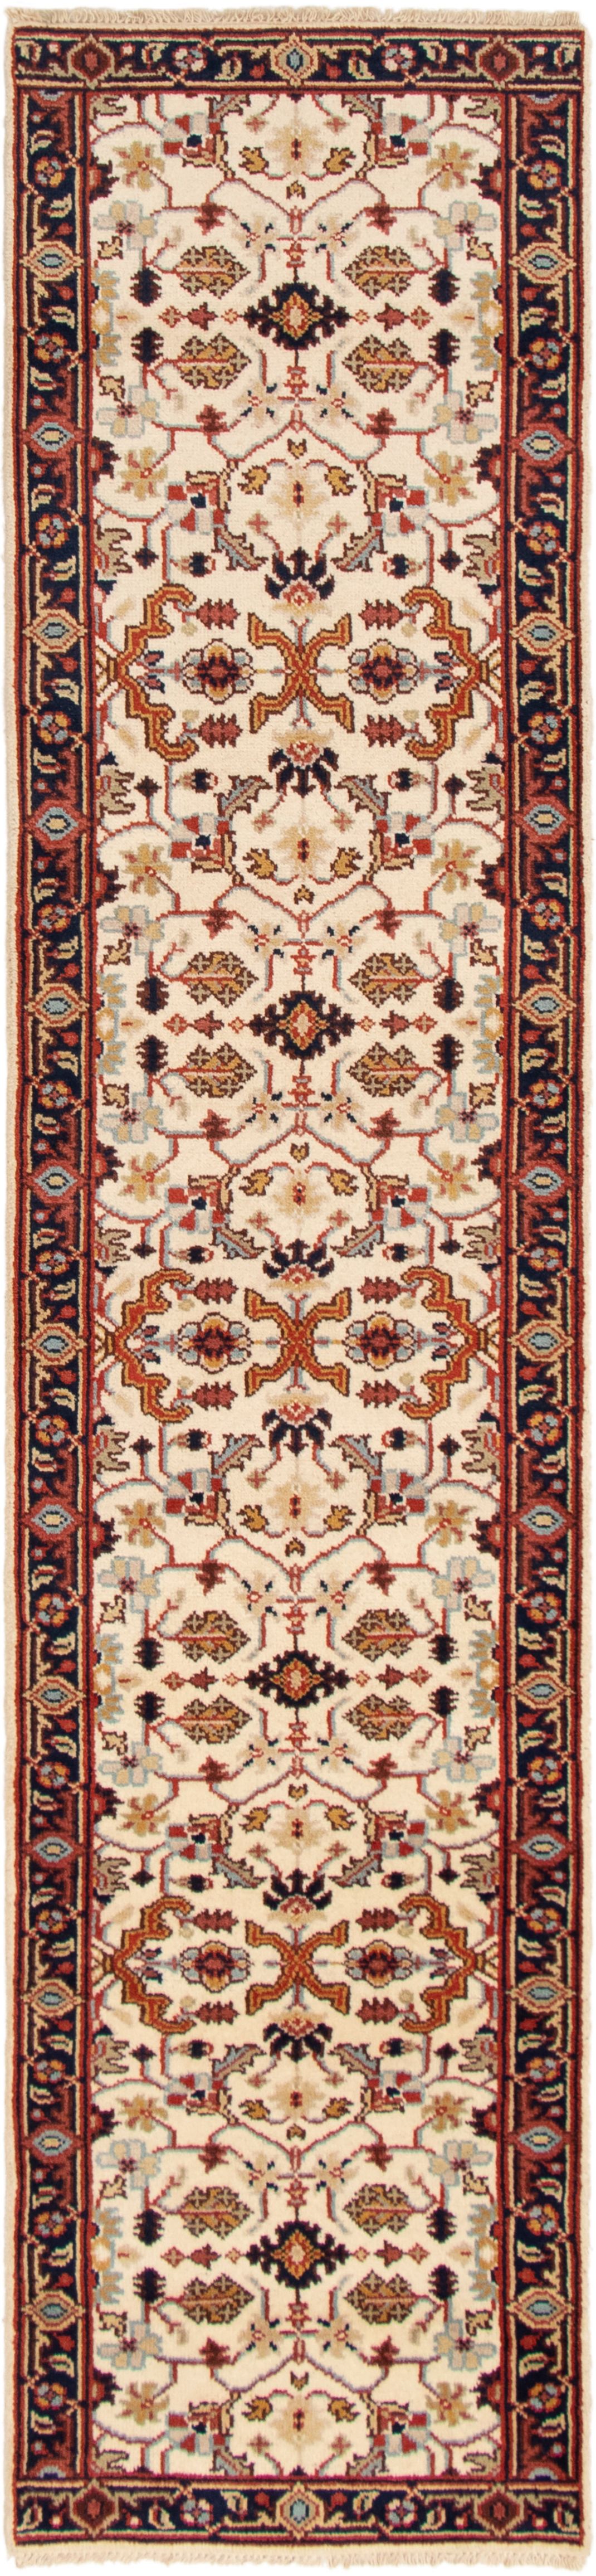 Hand-knotted Serapi Heritage Cream Wool Rug 2'7" x 11'8"  Size: 2'7" x 11'8"  